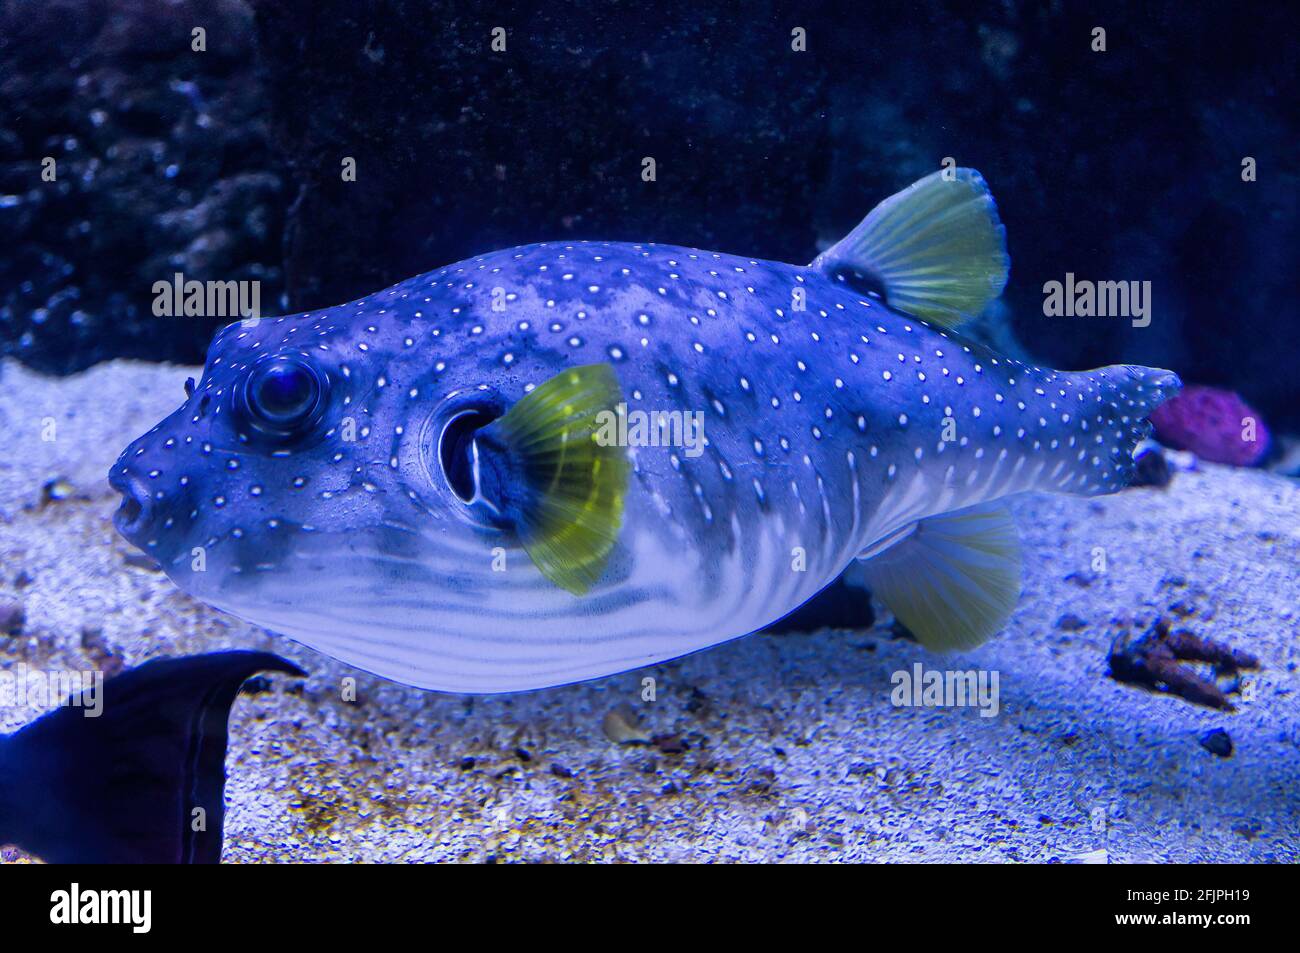 A White-spotted puffer (Arothron hispidus - a medium to large-sized puffer fish) standing at the bottom of his water tank in Sao Paulo aquarium. Stock Photo